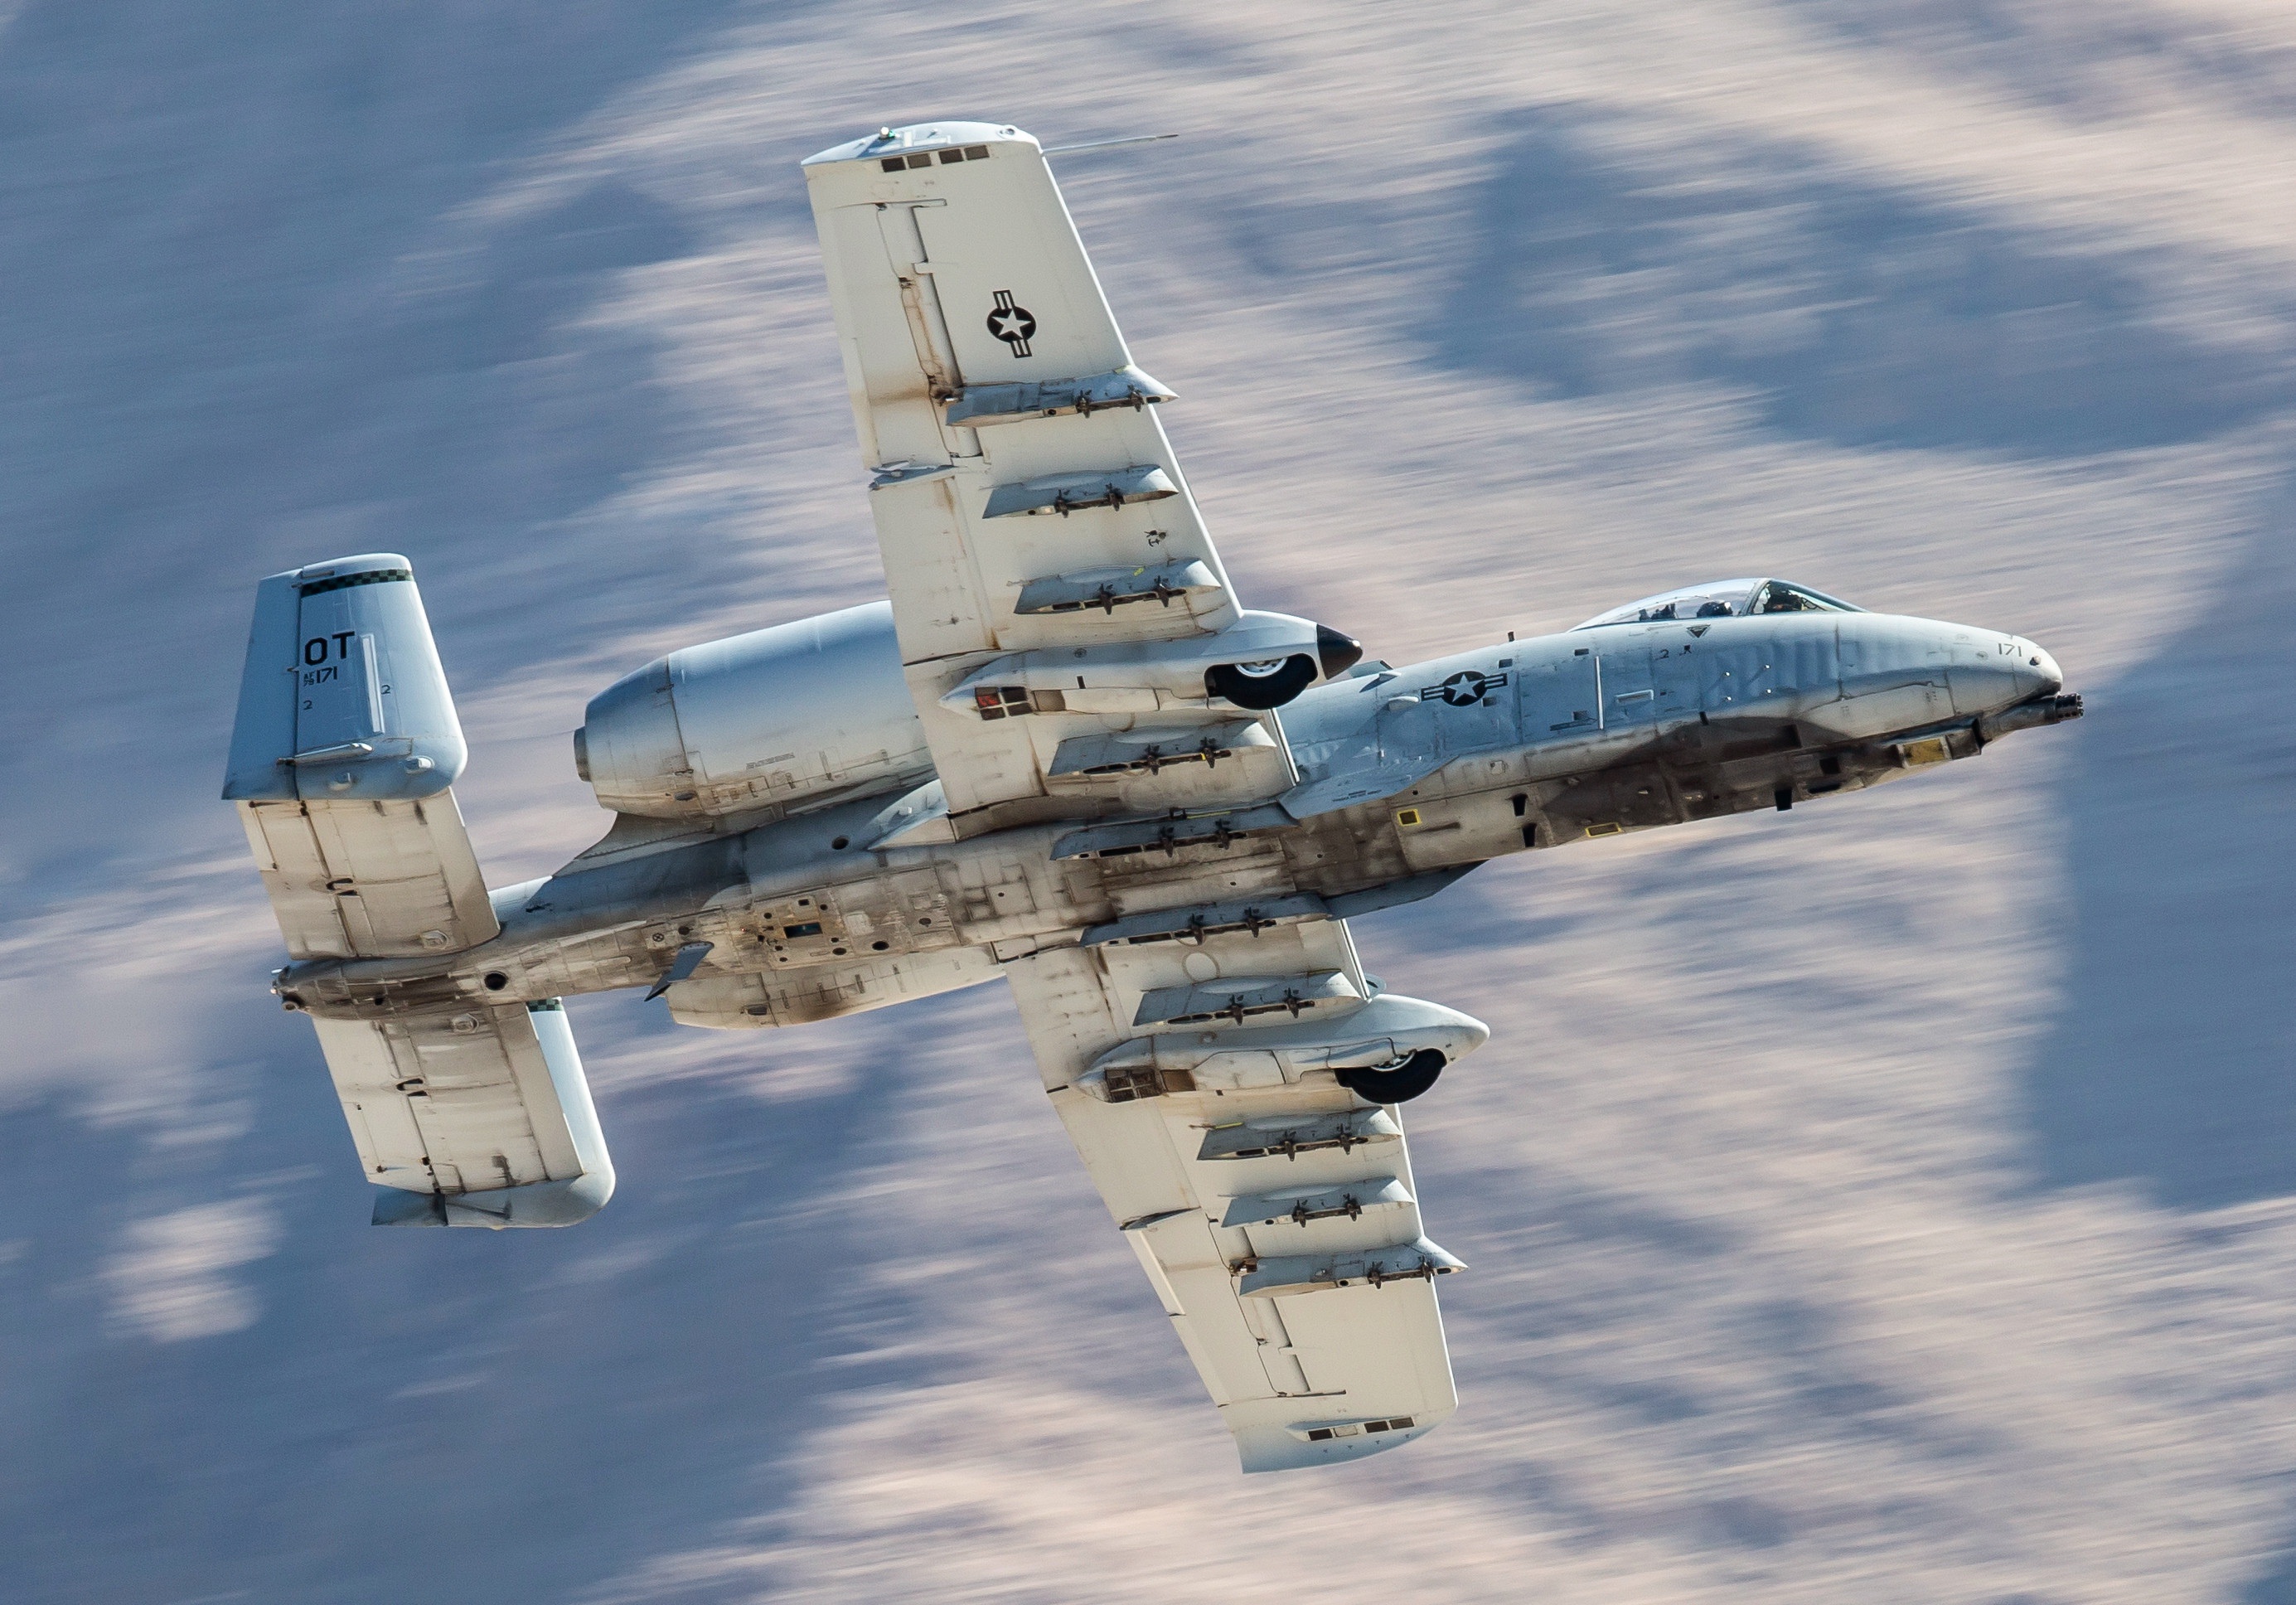 General 2770x1936 aircraft military military aircraft vehicle Fairchild Republic A-10 Thunderbolt II American aircraft Warthog bottom view motion blur blurred blurry background pilot sky flying